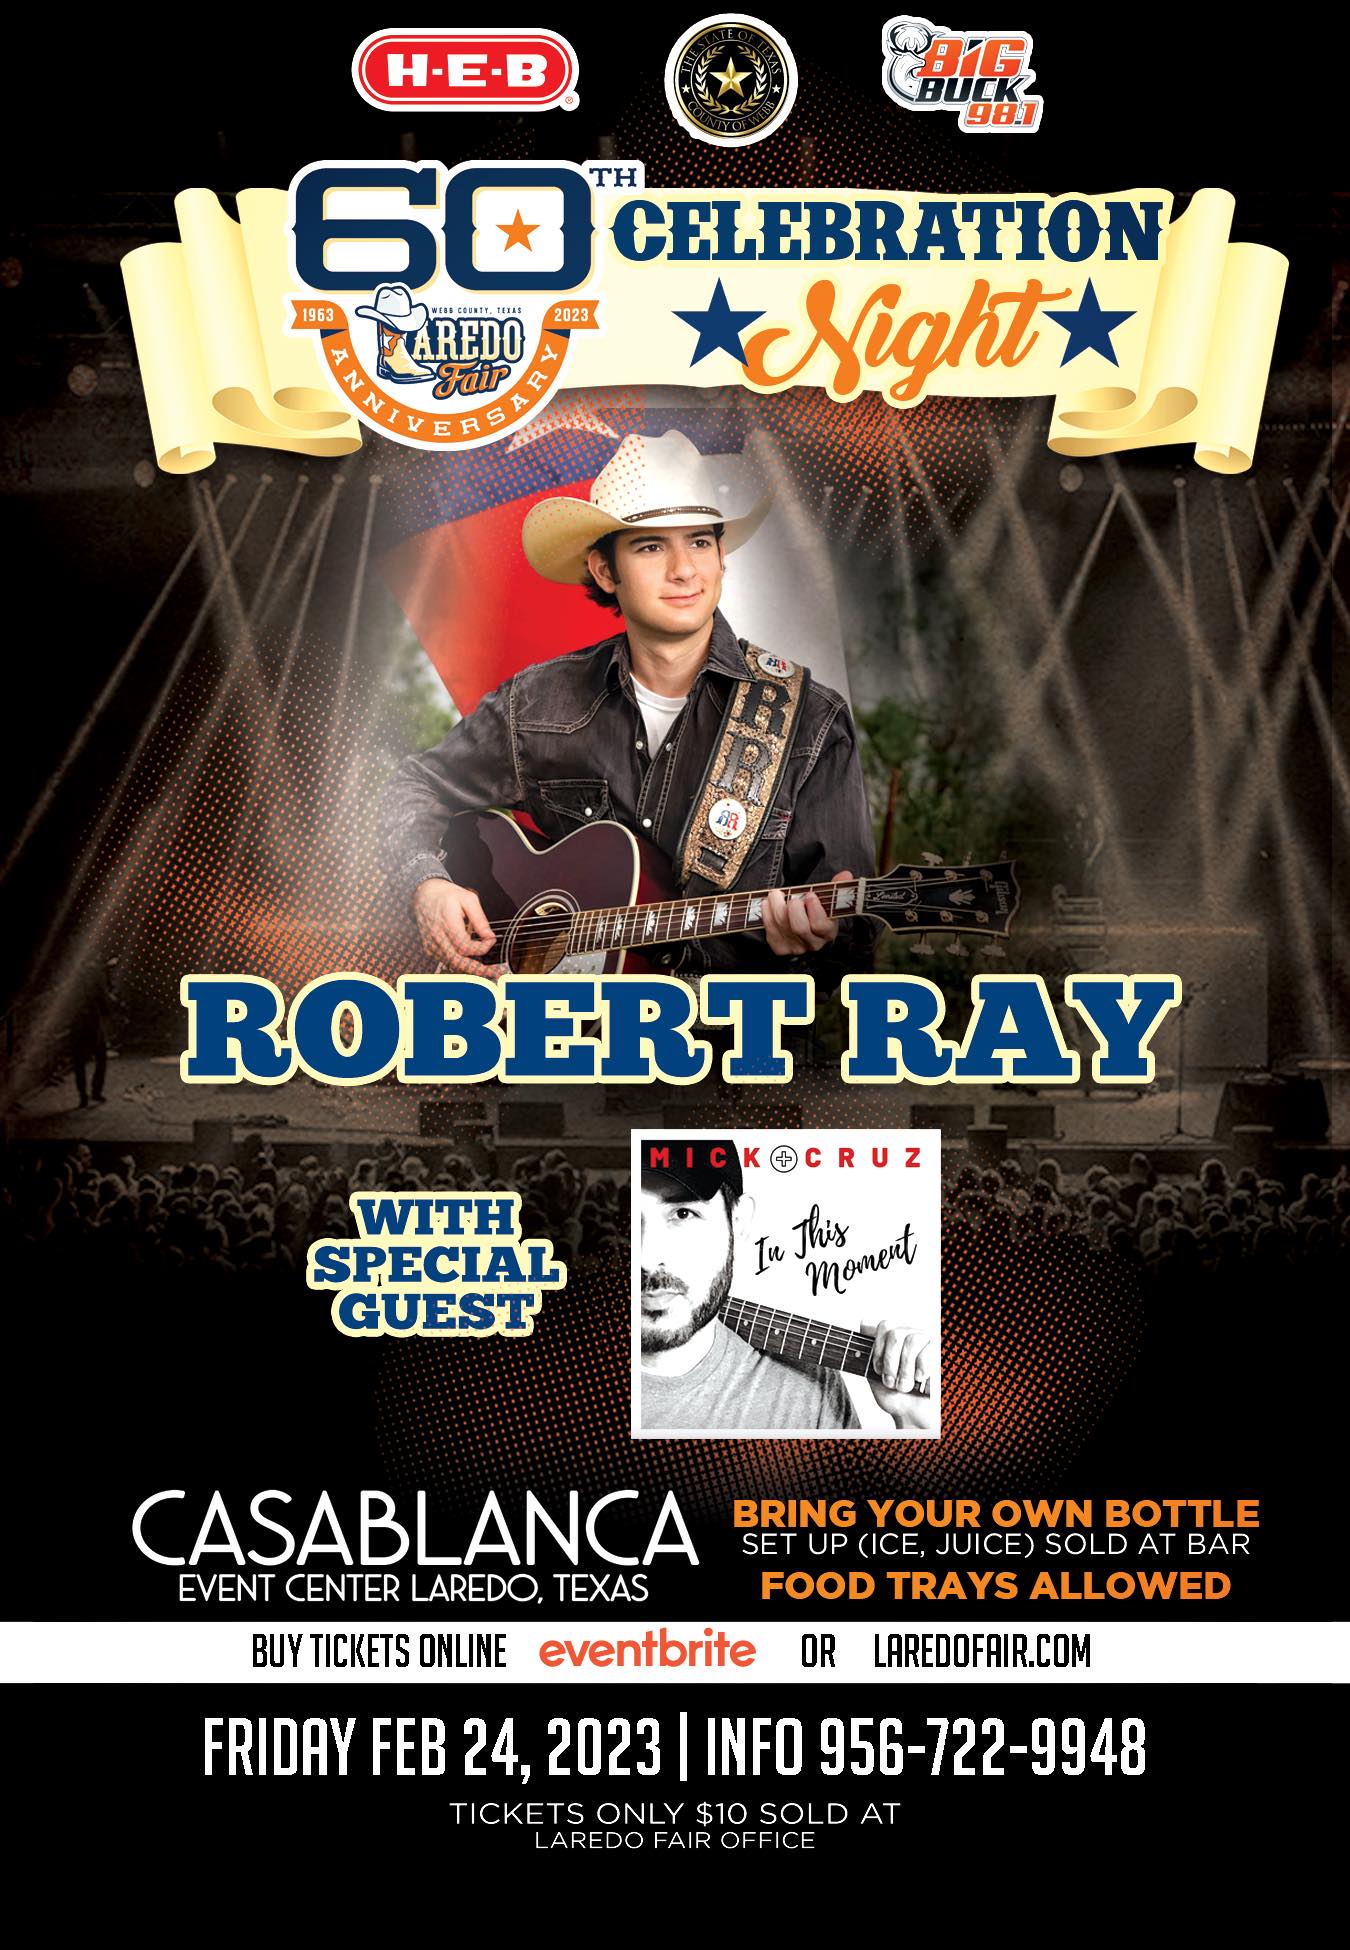 Robert Ray w/ special guest Mick  - Saturday, Feb. 24th